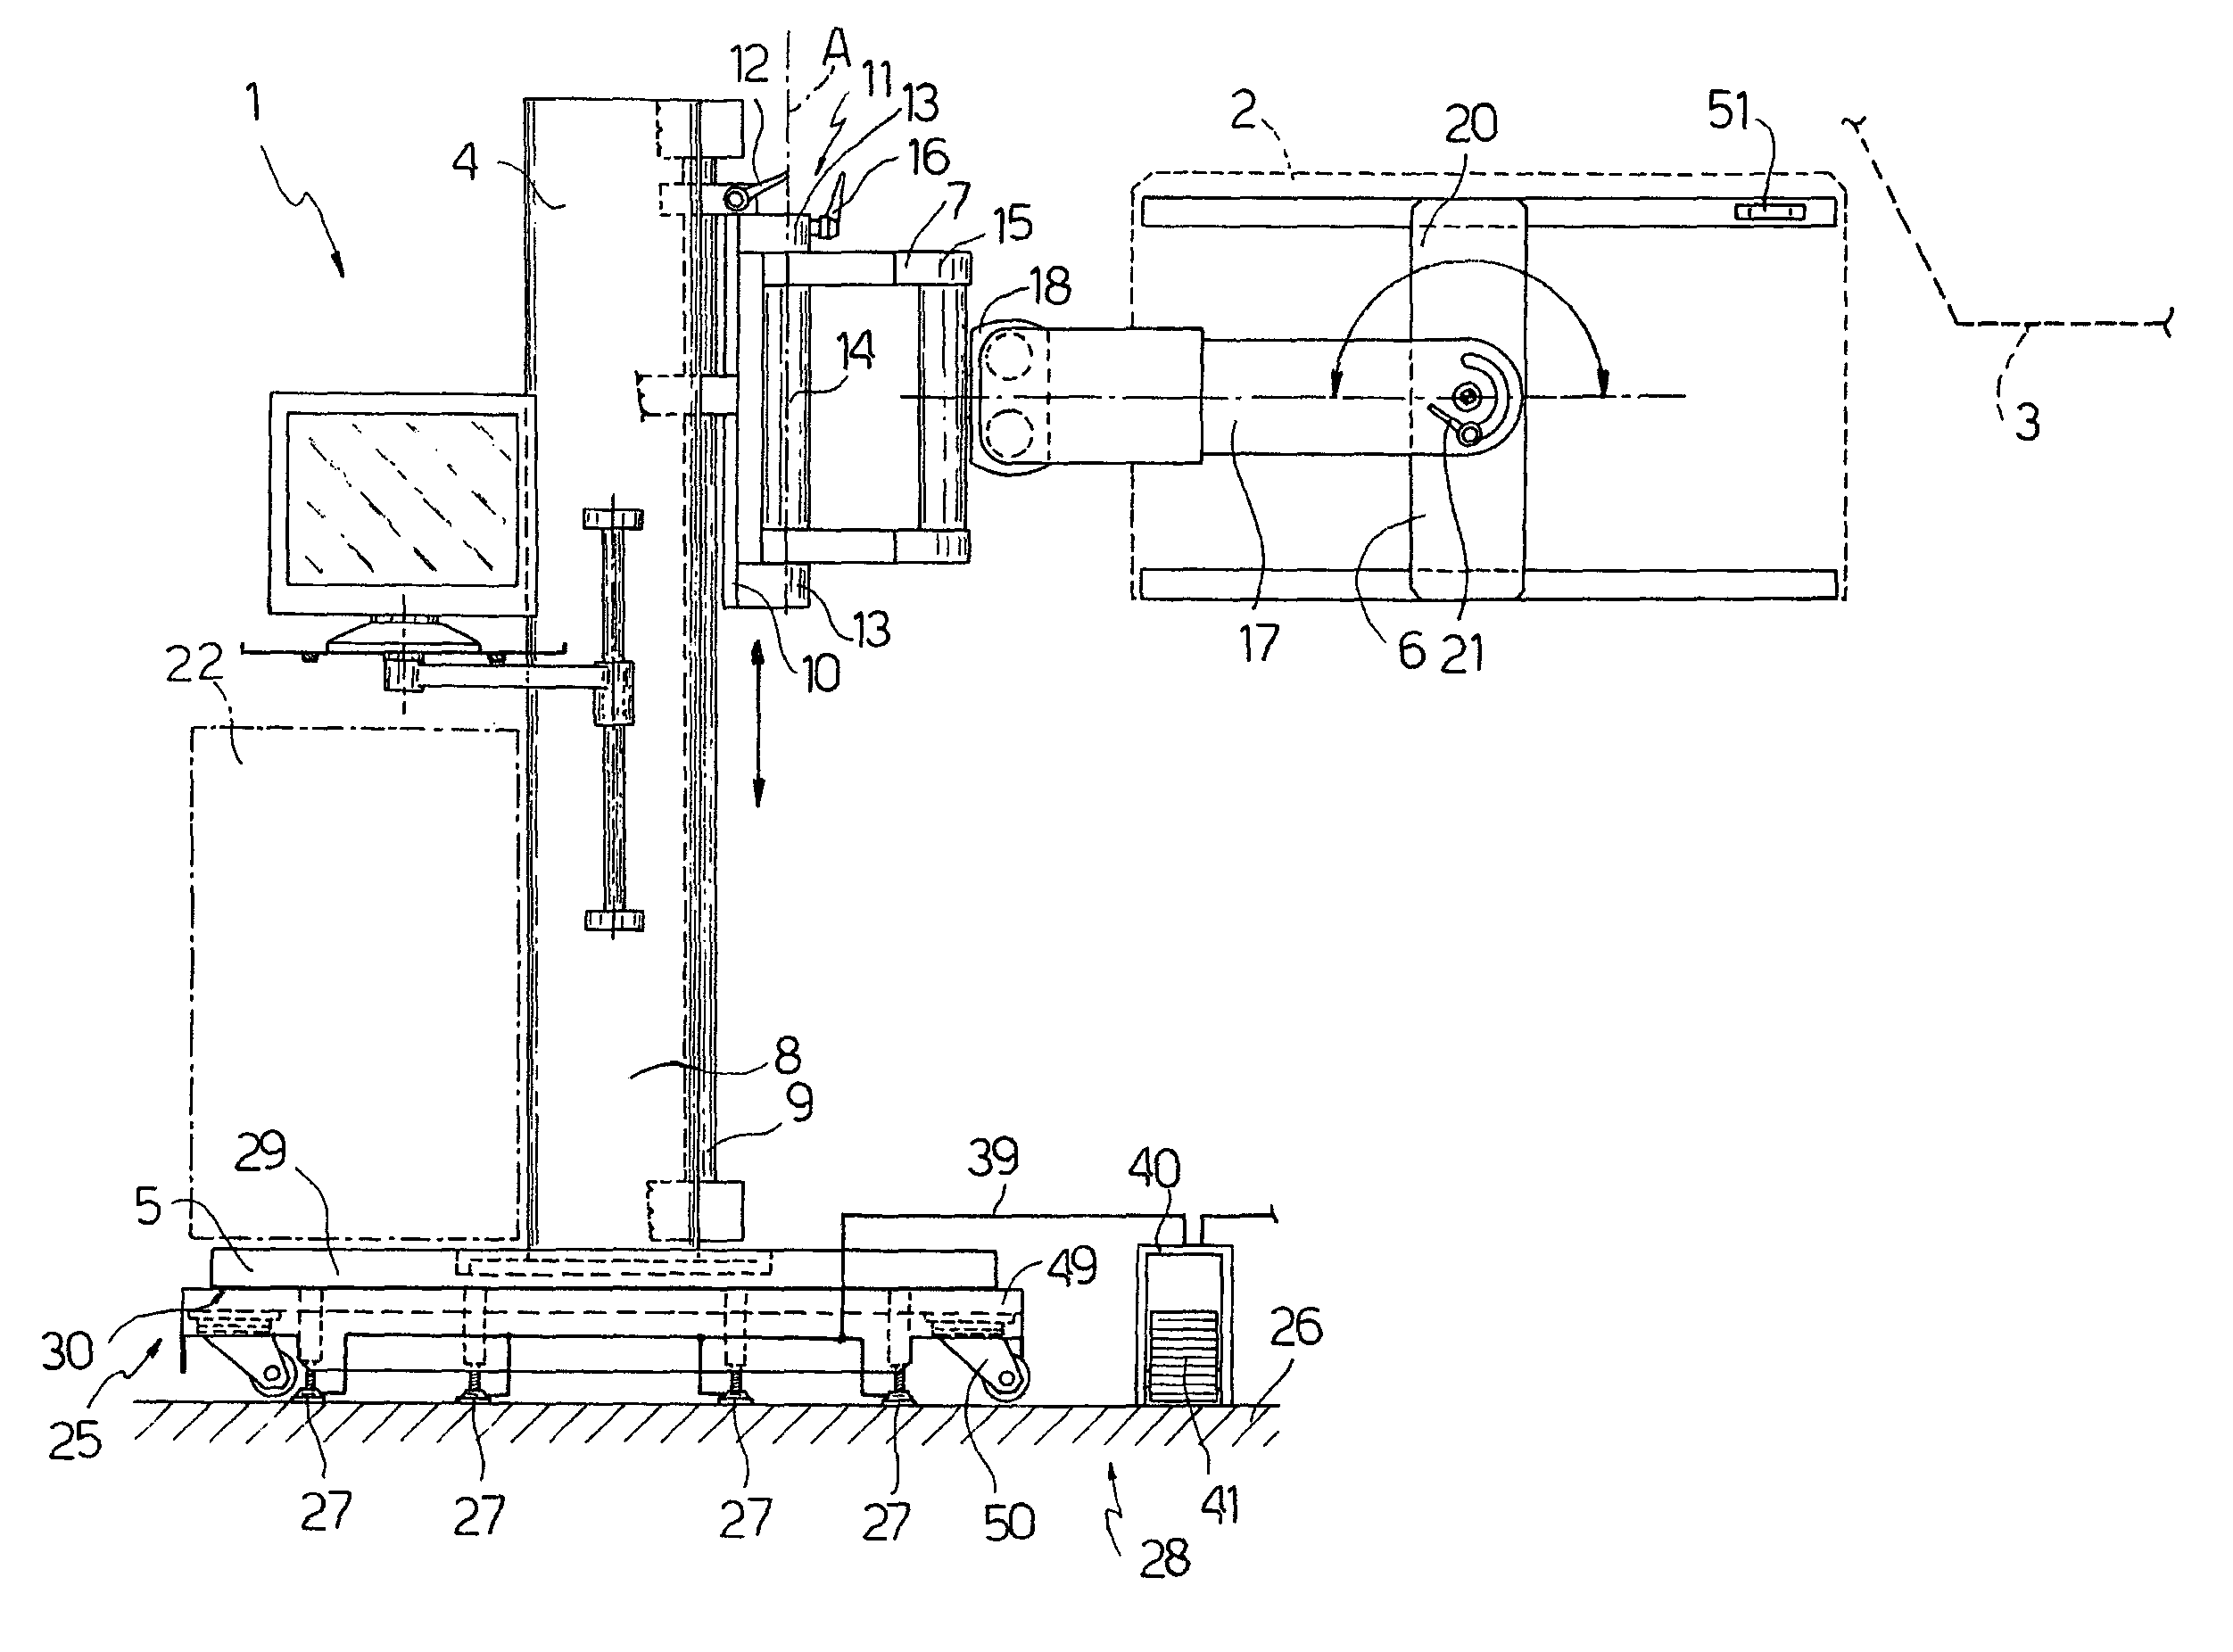 Device for positioning an electronic test head with respect to a manipulator for manipulating electronic components, in particular integrated circuits